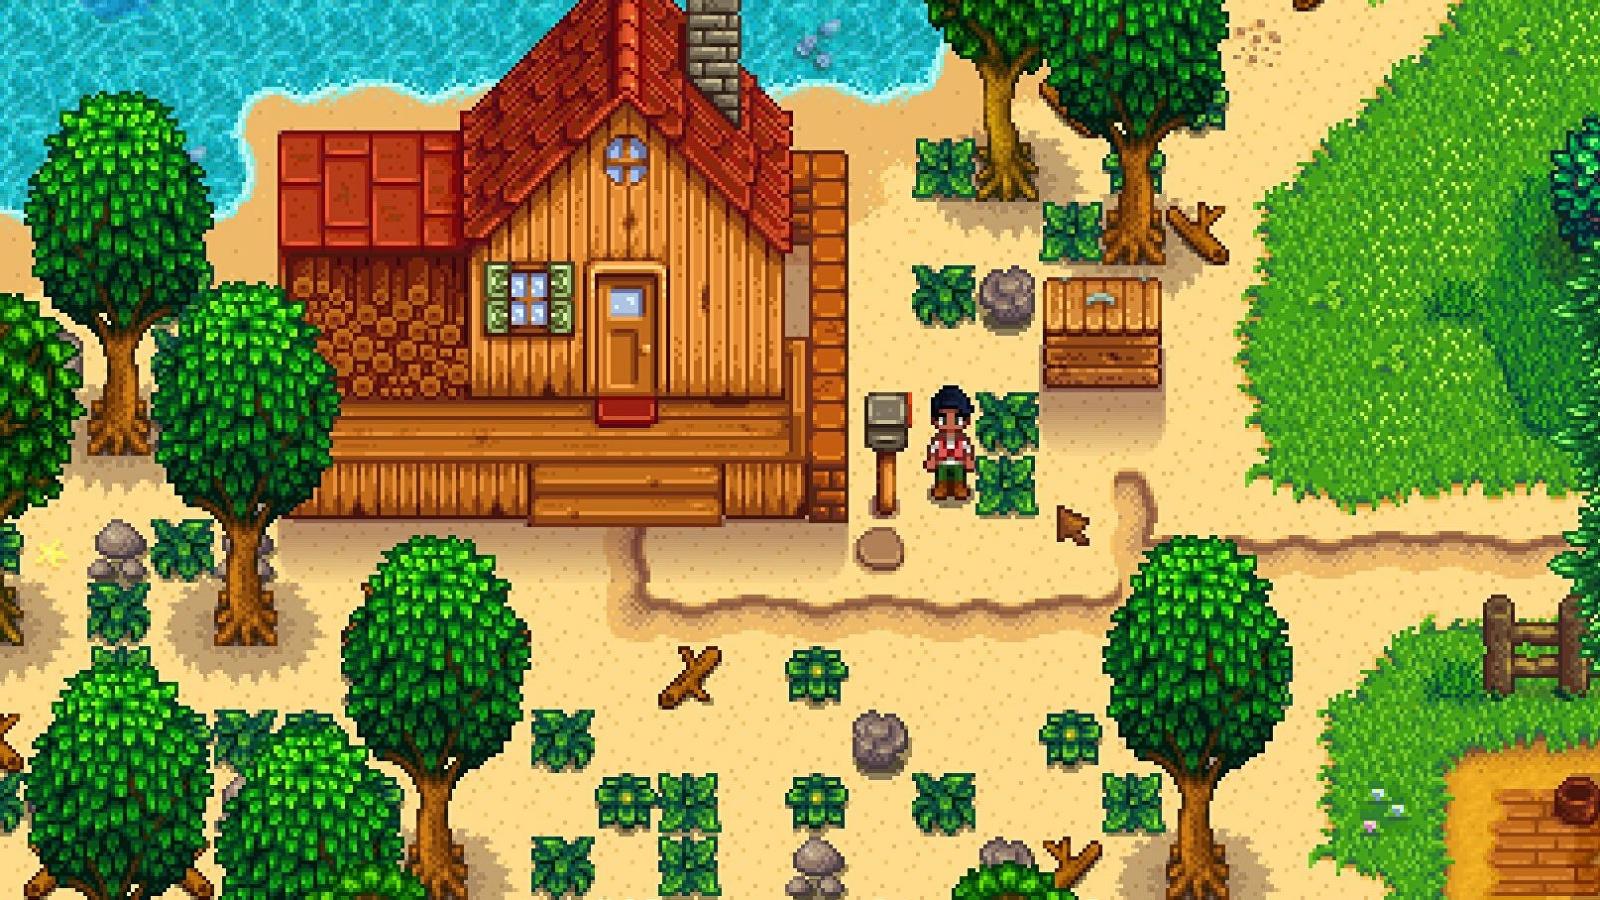 Stardew Valley Mobile: How to Access Ginger Island